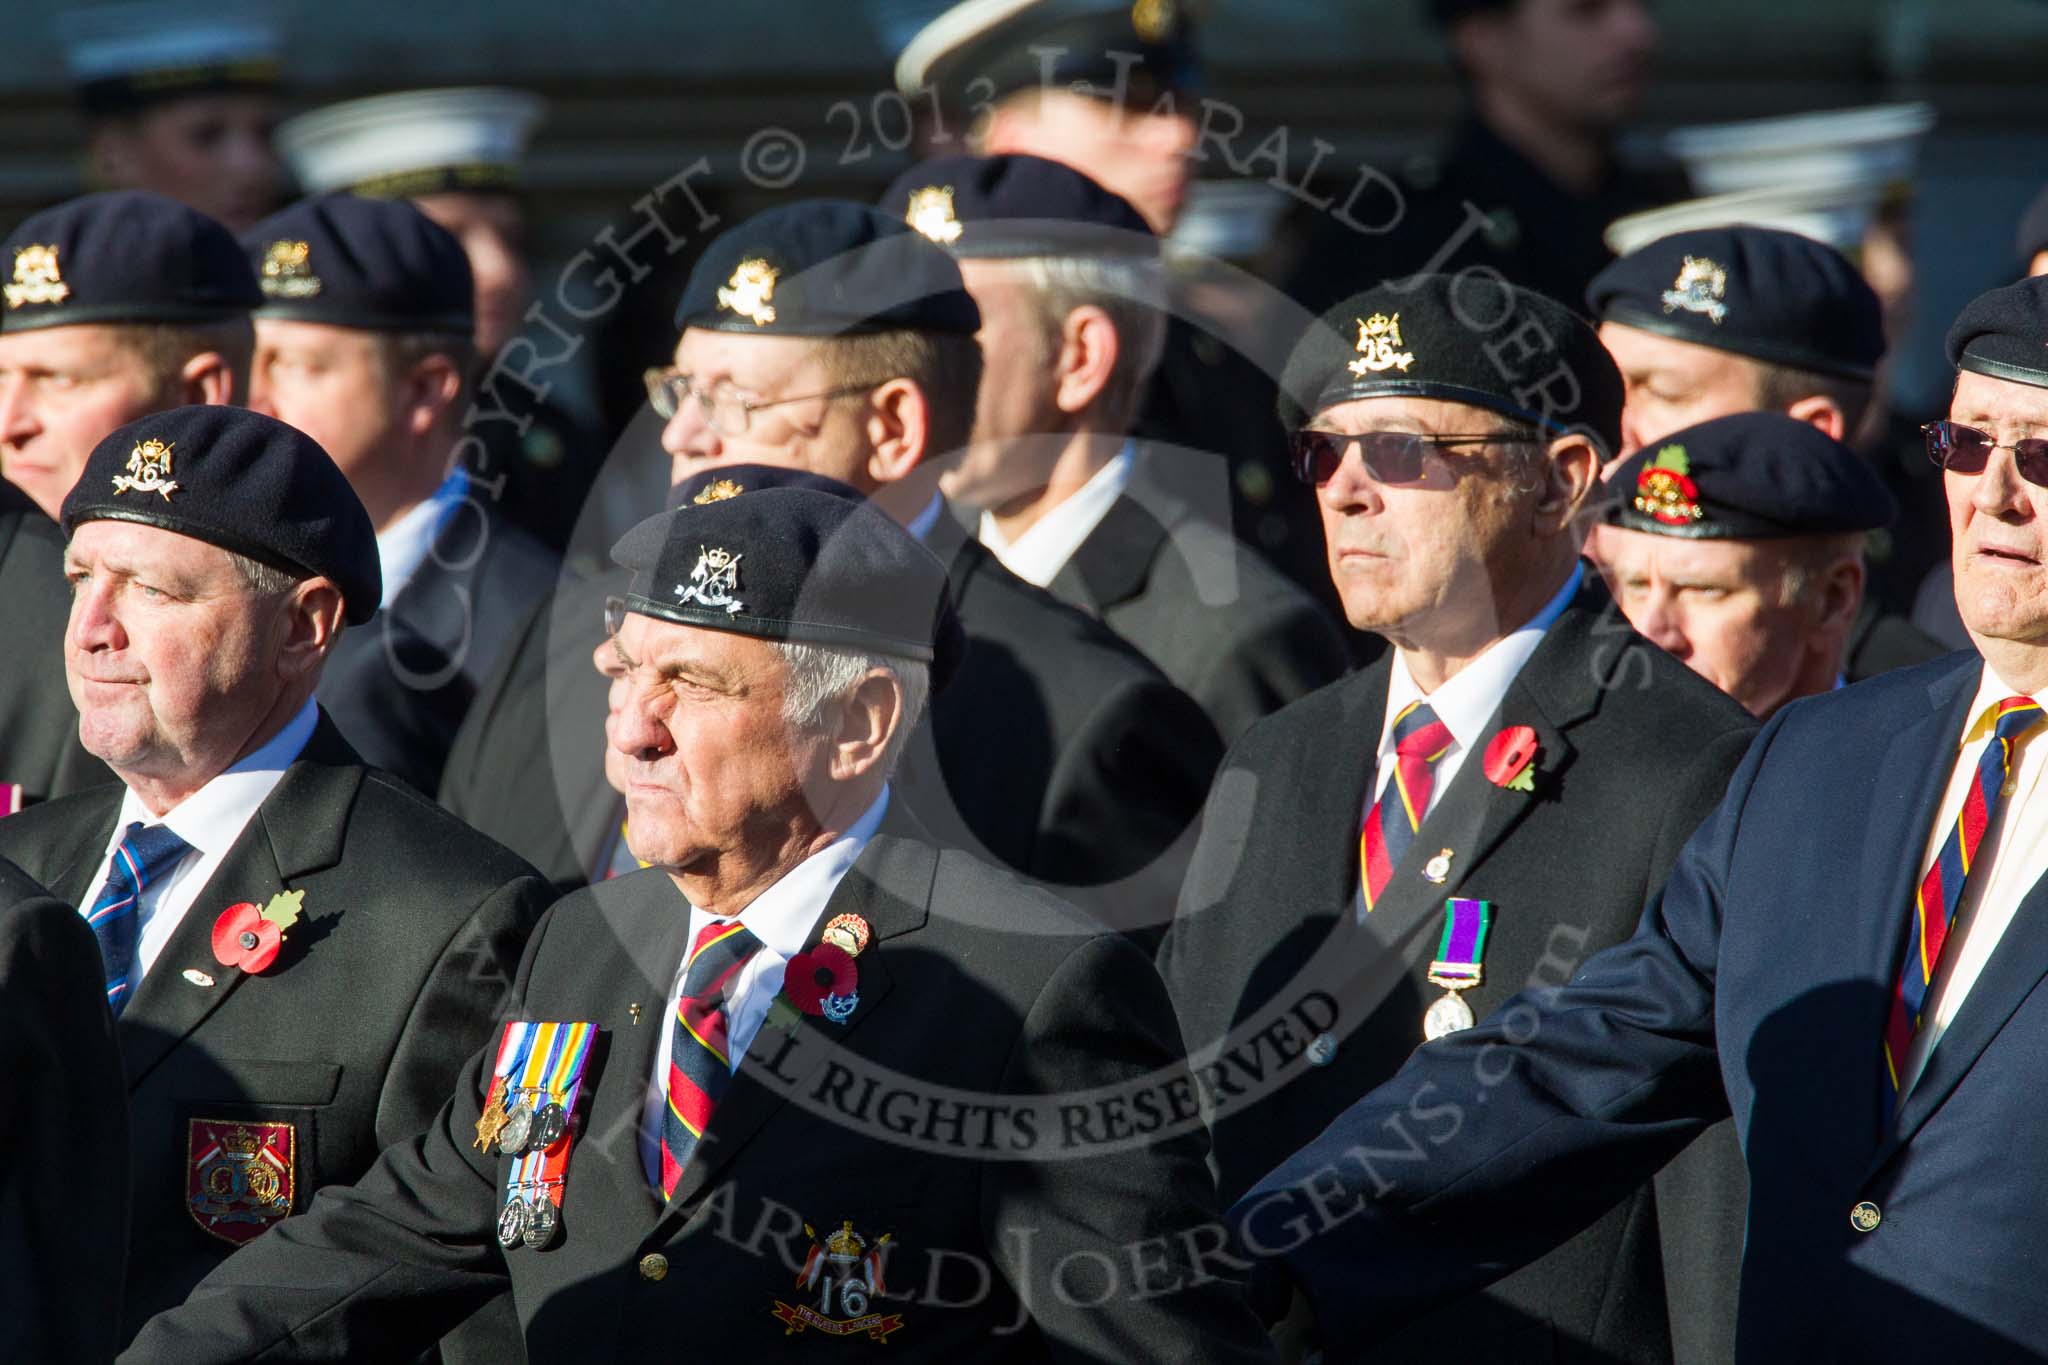 Remembrance Sunday at the Cenotaph in London 2014: Group B30 - 16/5th Queen's Royal Lancers.
Press stand opposite the Foreign Office building, Whitehall, London SW1,
London,
Greater London,
United Kingdom,
on 09 November 2014 at 12:13, image #1894